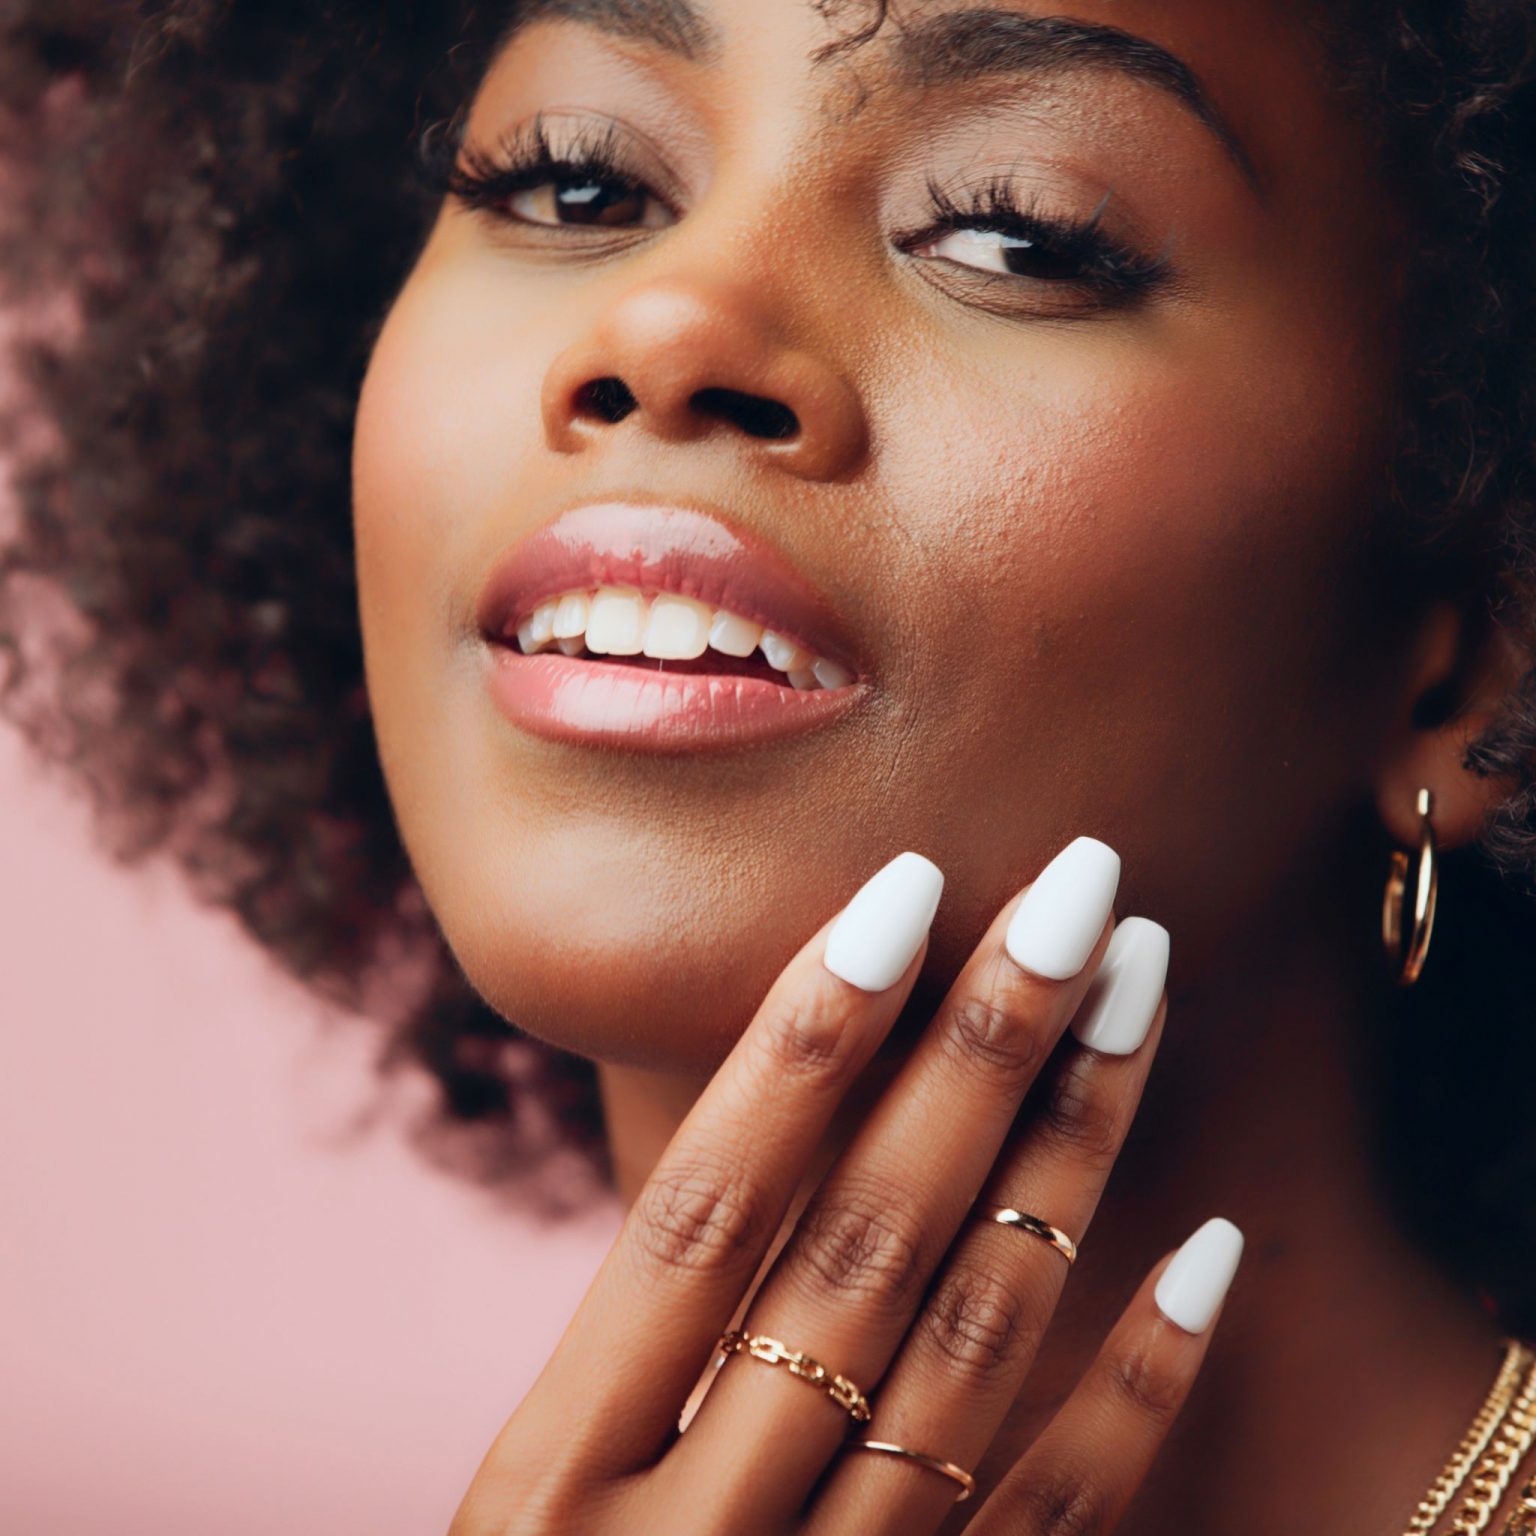 Headshot Of African American Woman Posing For The Camera Showing Off Her White Polished Nails